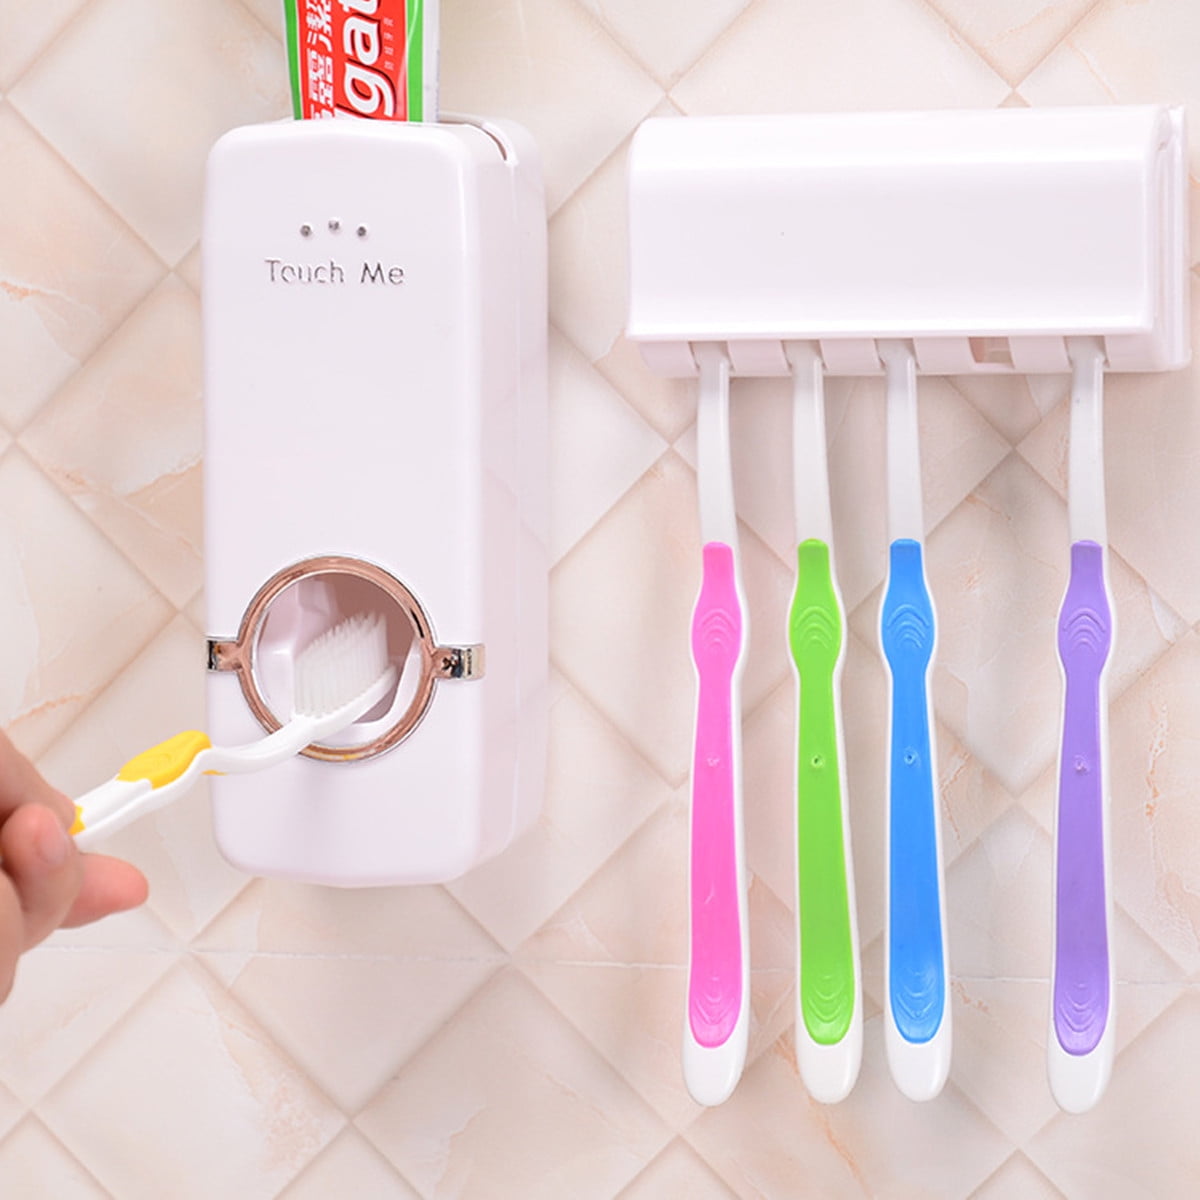 Home Automatic Toothpaste Dispenser Toothbrush Holder Wall Mounted Bathroom USA* 